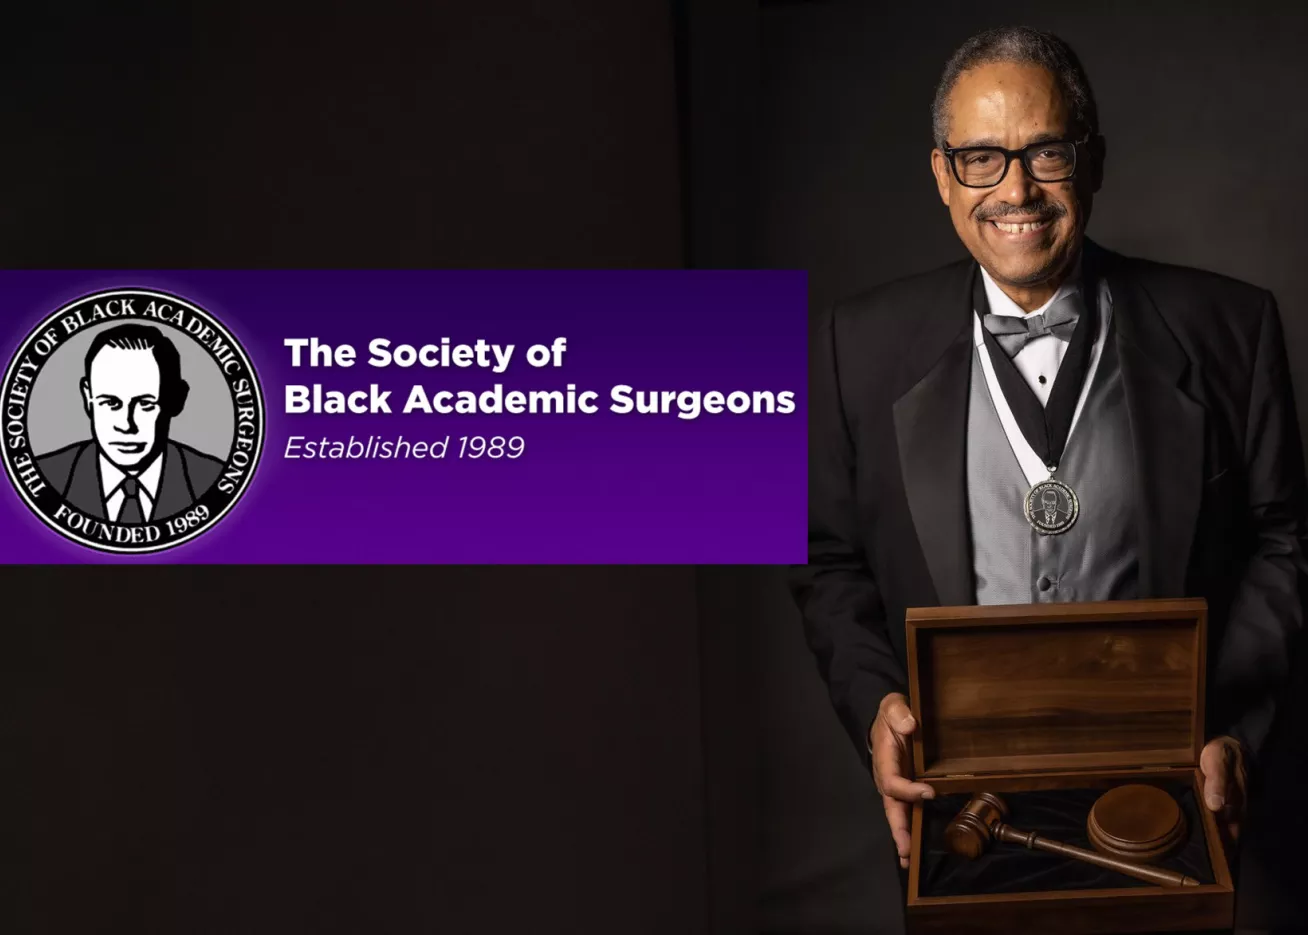 Dr. Andre Campbell Completes his Service as the 28th President of the Society of Black Academic Surgeons